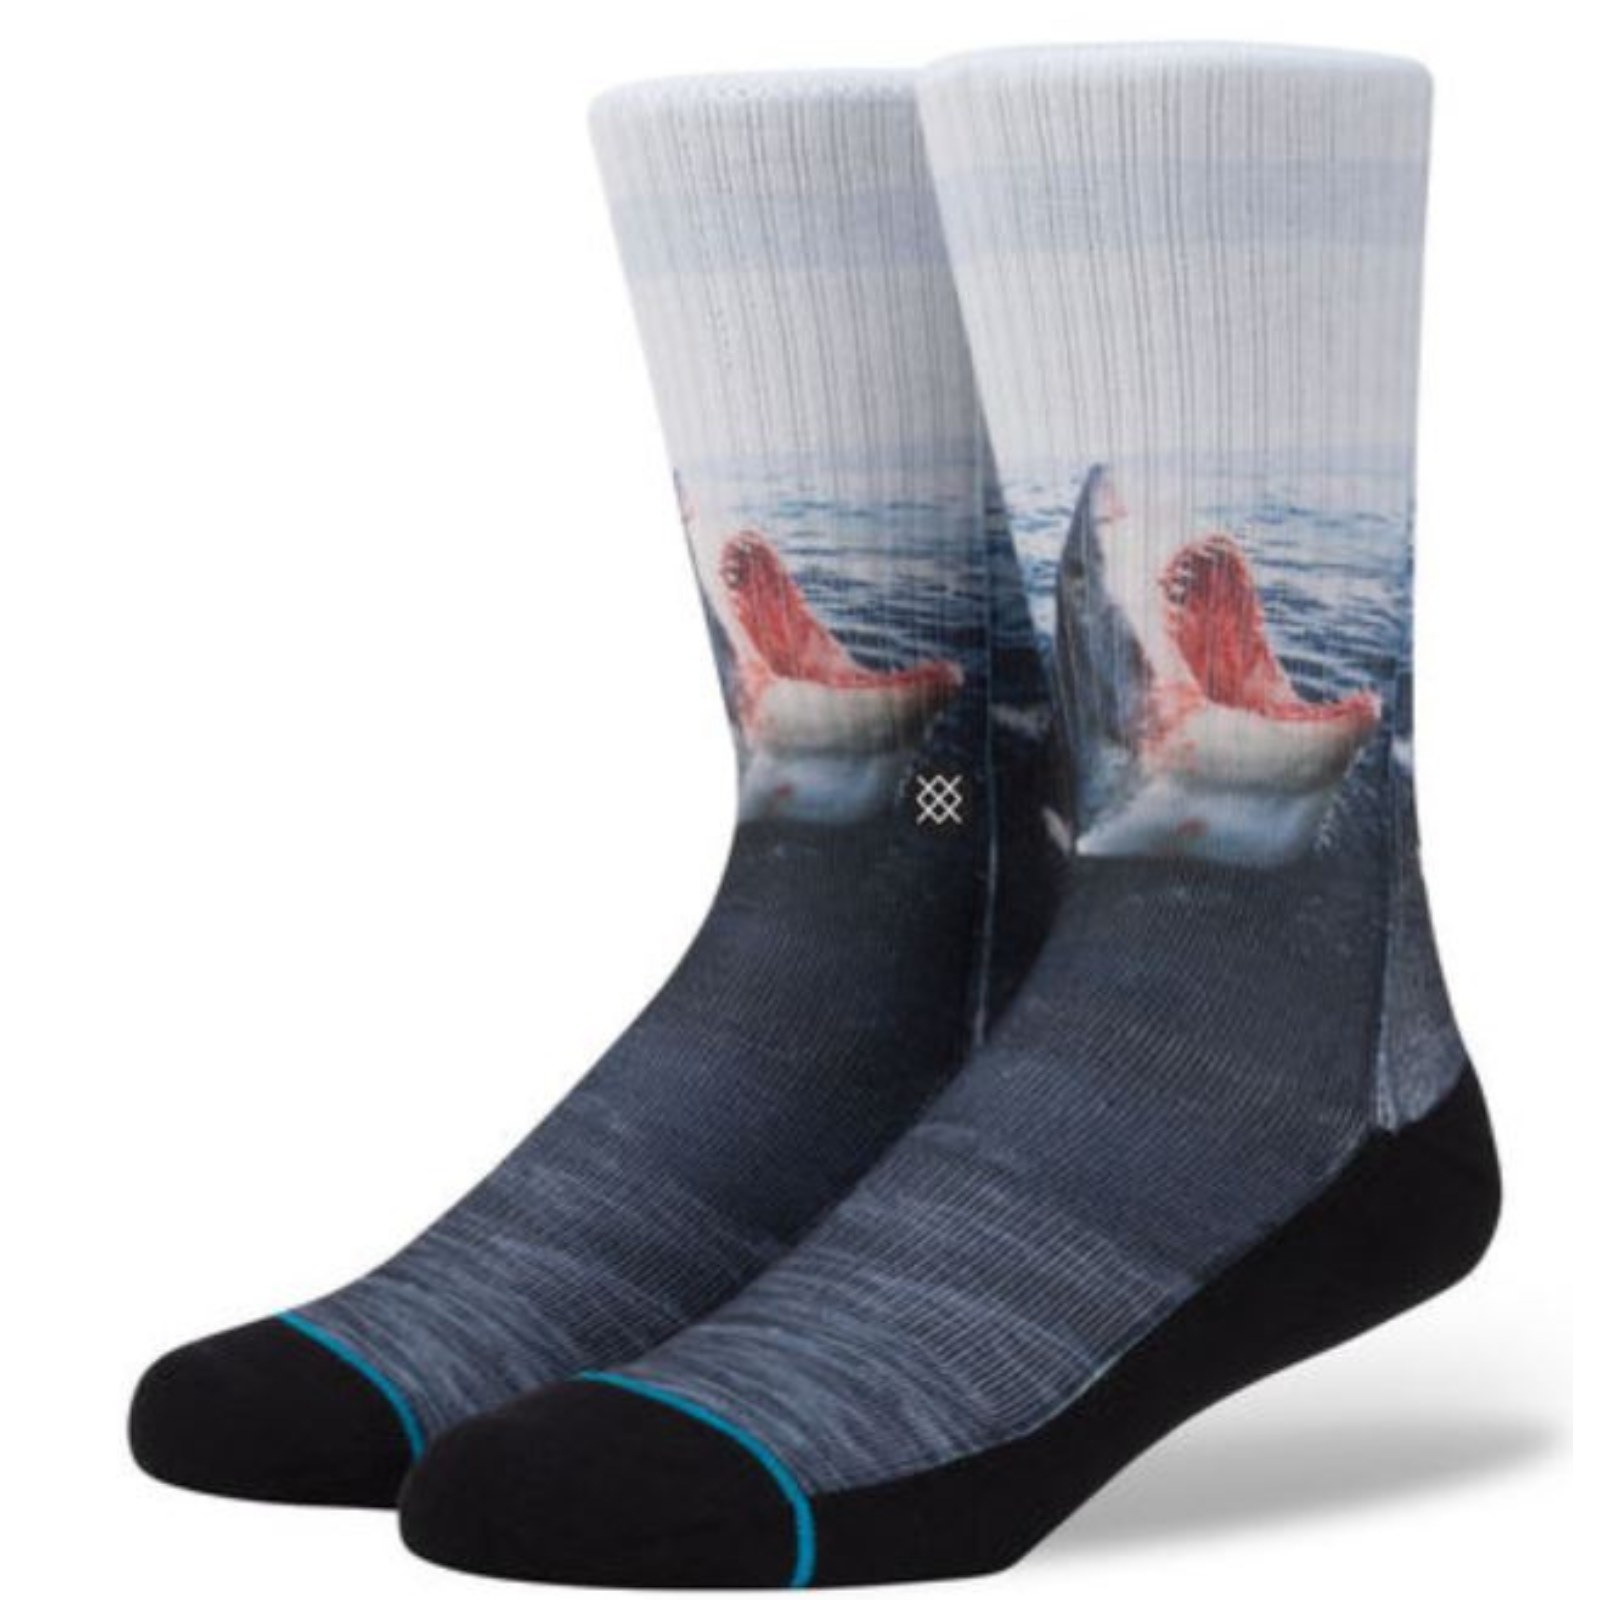 Stance Landlord men's crew sock featuring image of great white shark coming out of water with open mouth. Socks shown on display feet.